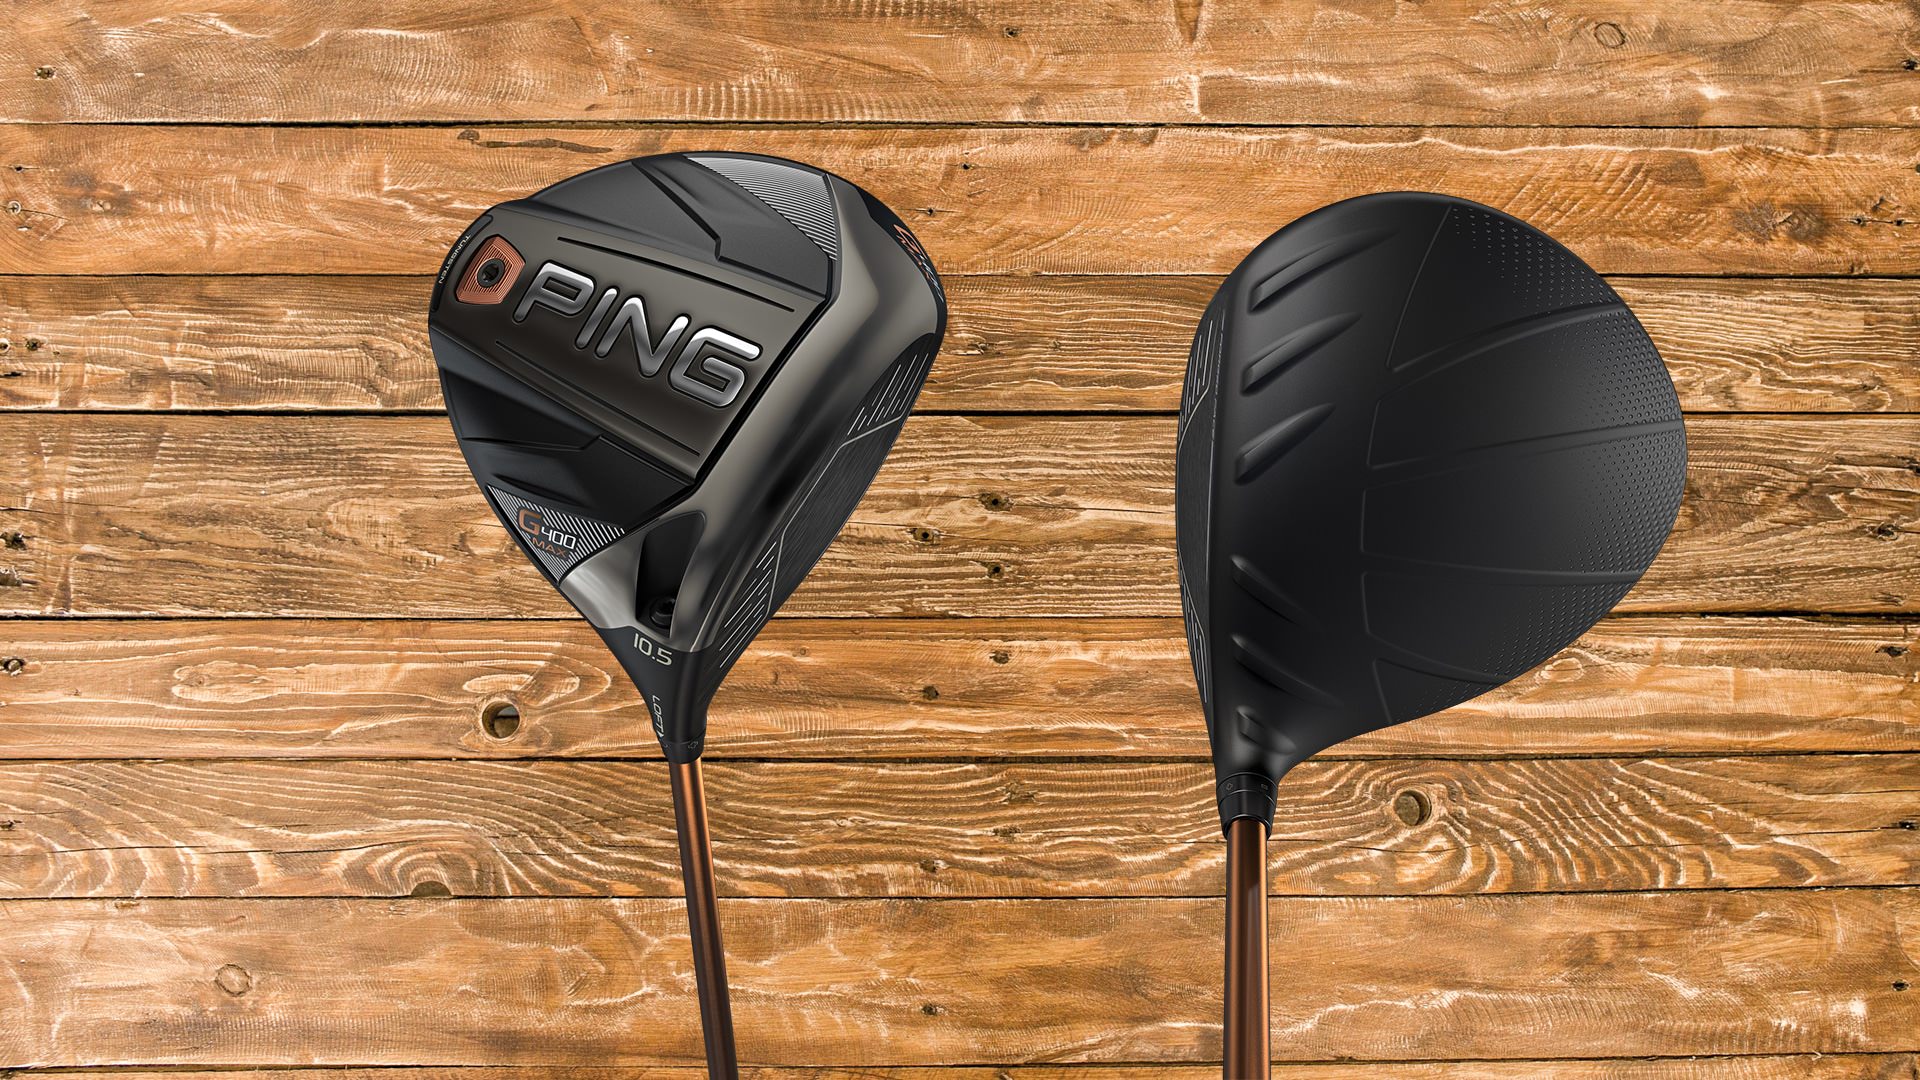 Ping G400 Max Driver Review - Golf Equipment Reviews